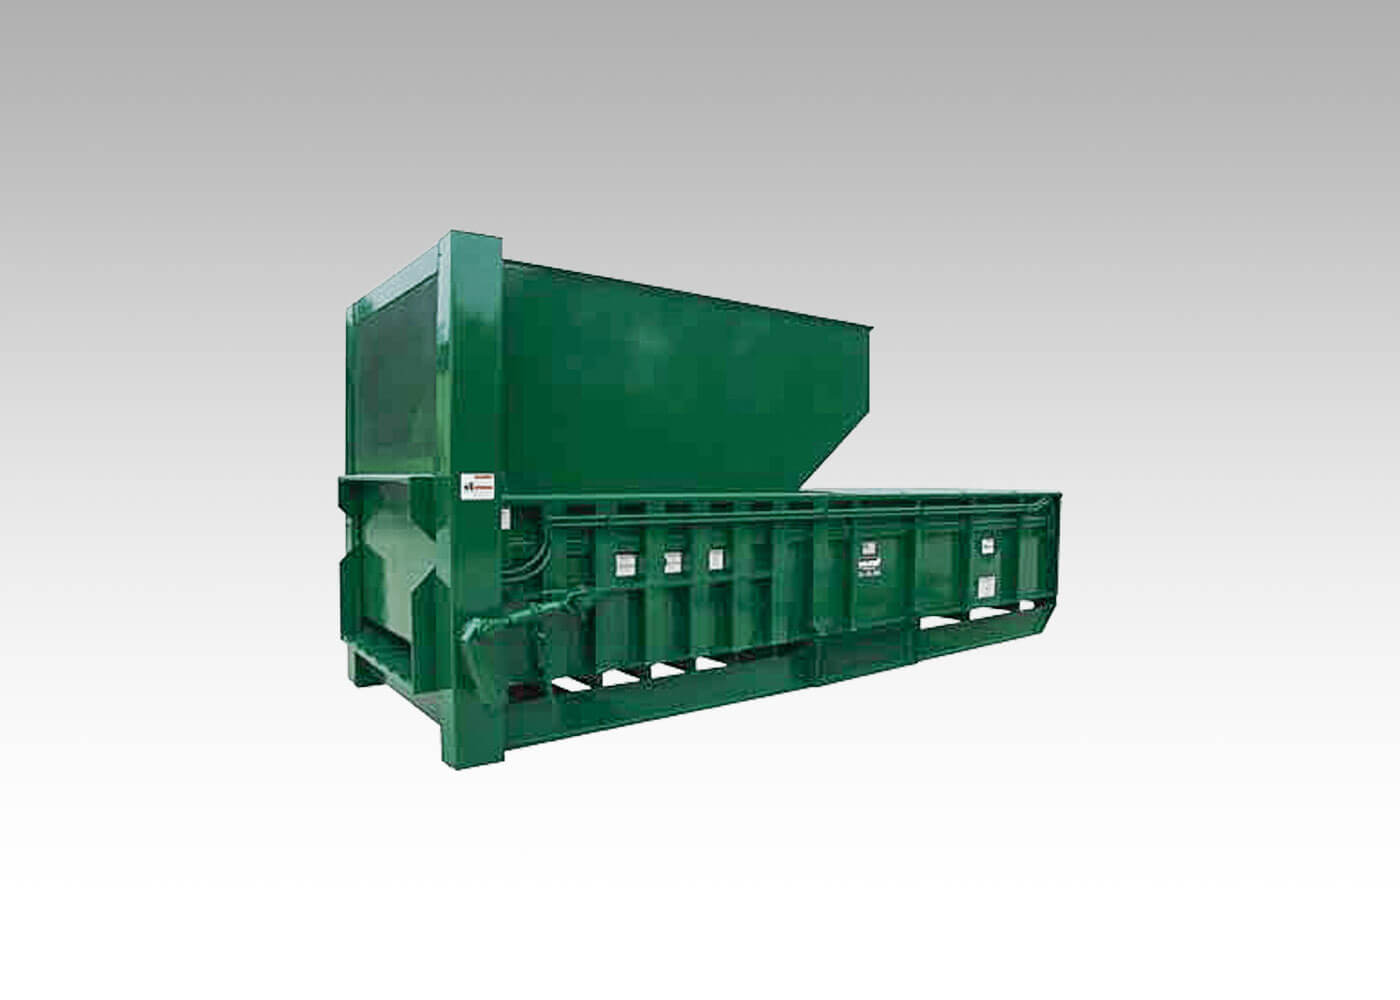 Commercial trash compactor precrushers that crush material before compactor for higher compaction rates